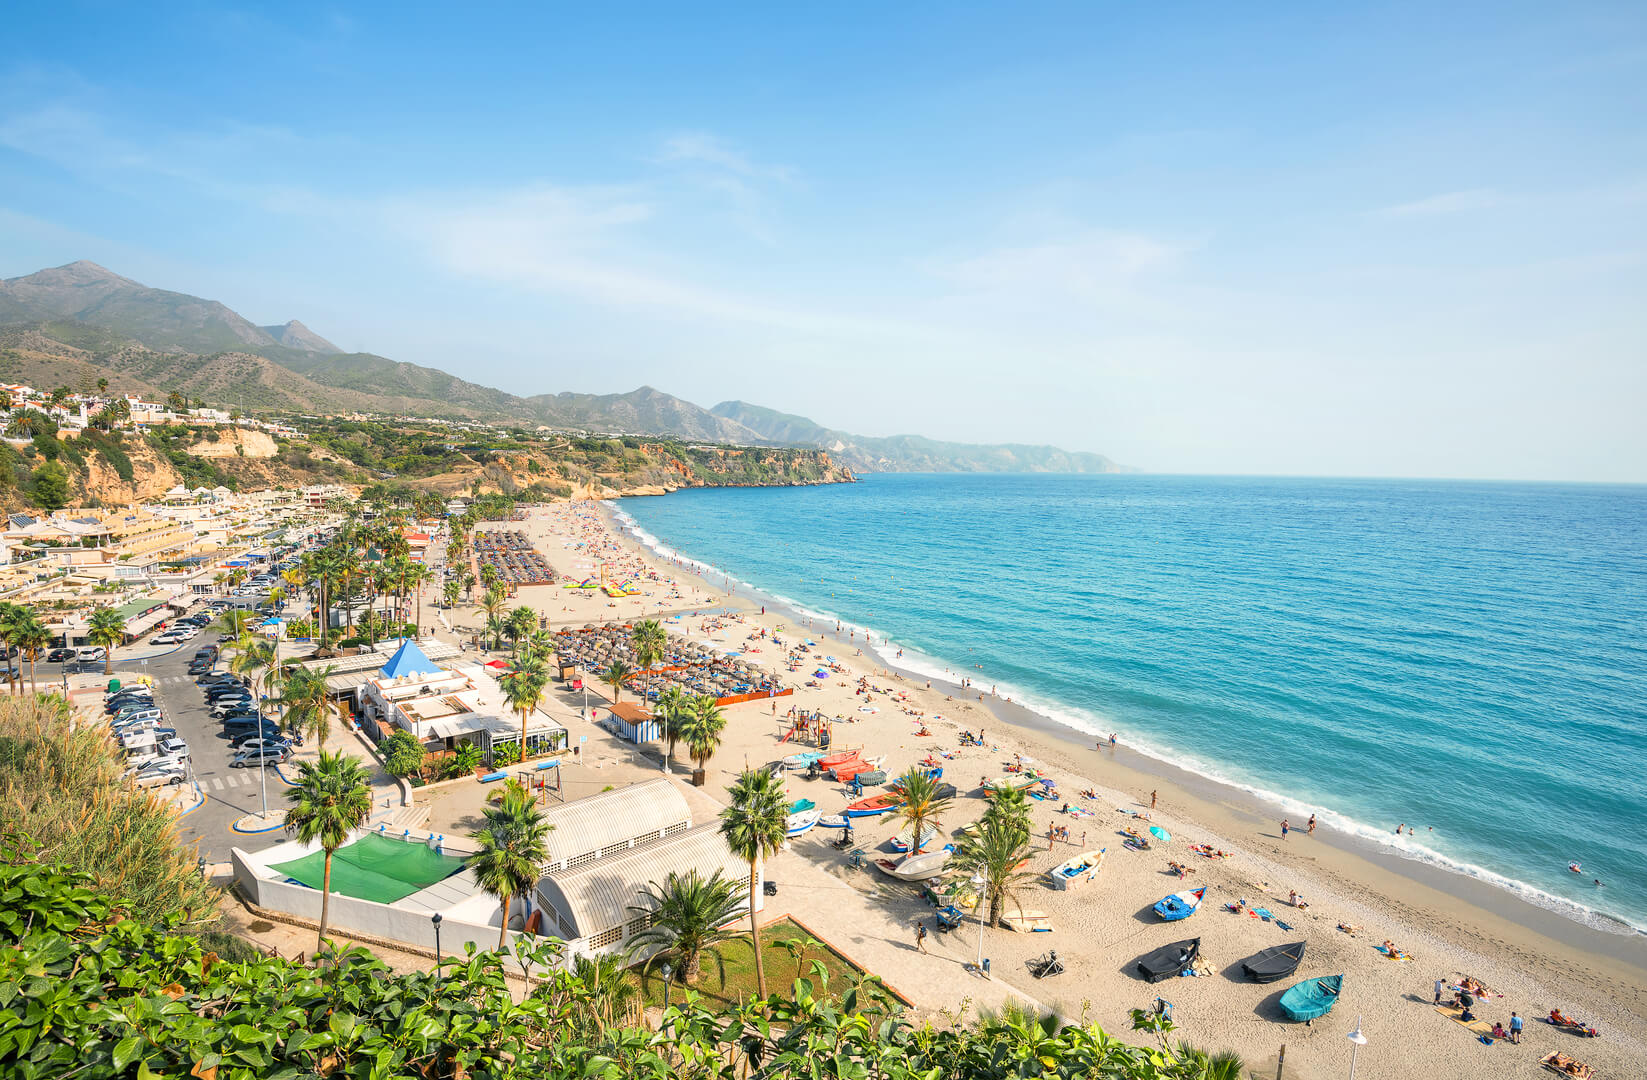 View of beach in Nerja. Malaga province, Costa del Sol, Andalusia, Spain